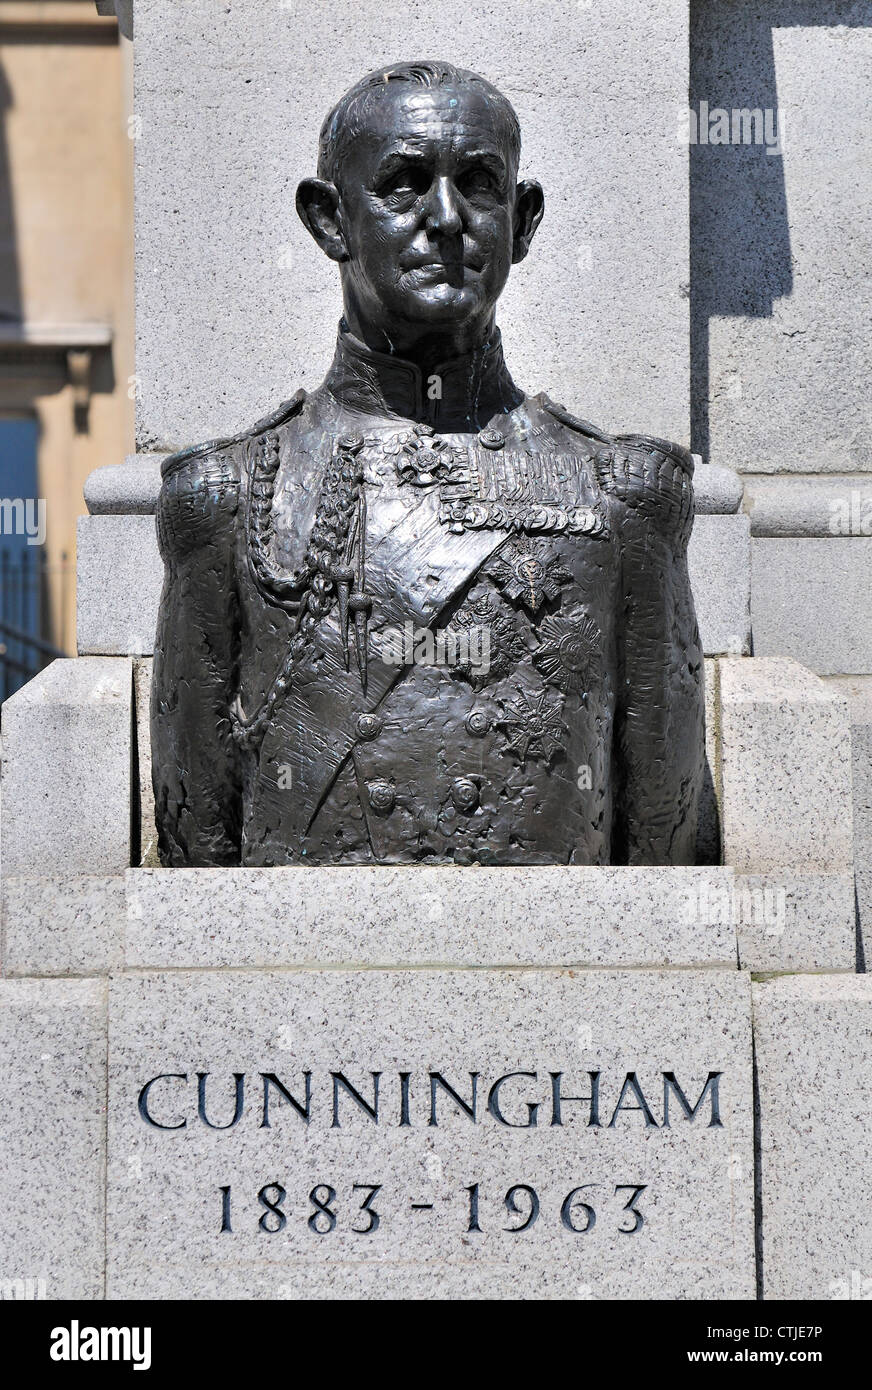 London, England, UK. Bust of Admiral of the Fleet Andrew Cunningham, 1st Viscount Cunningham of Hyndhope, in Trafalgar Square Stock Photo